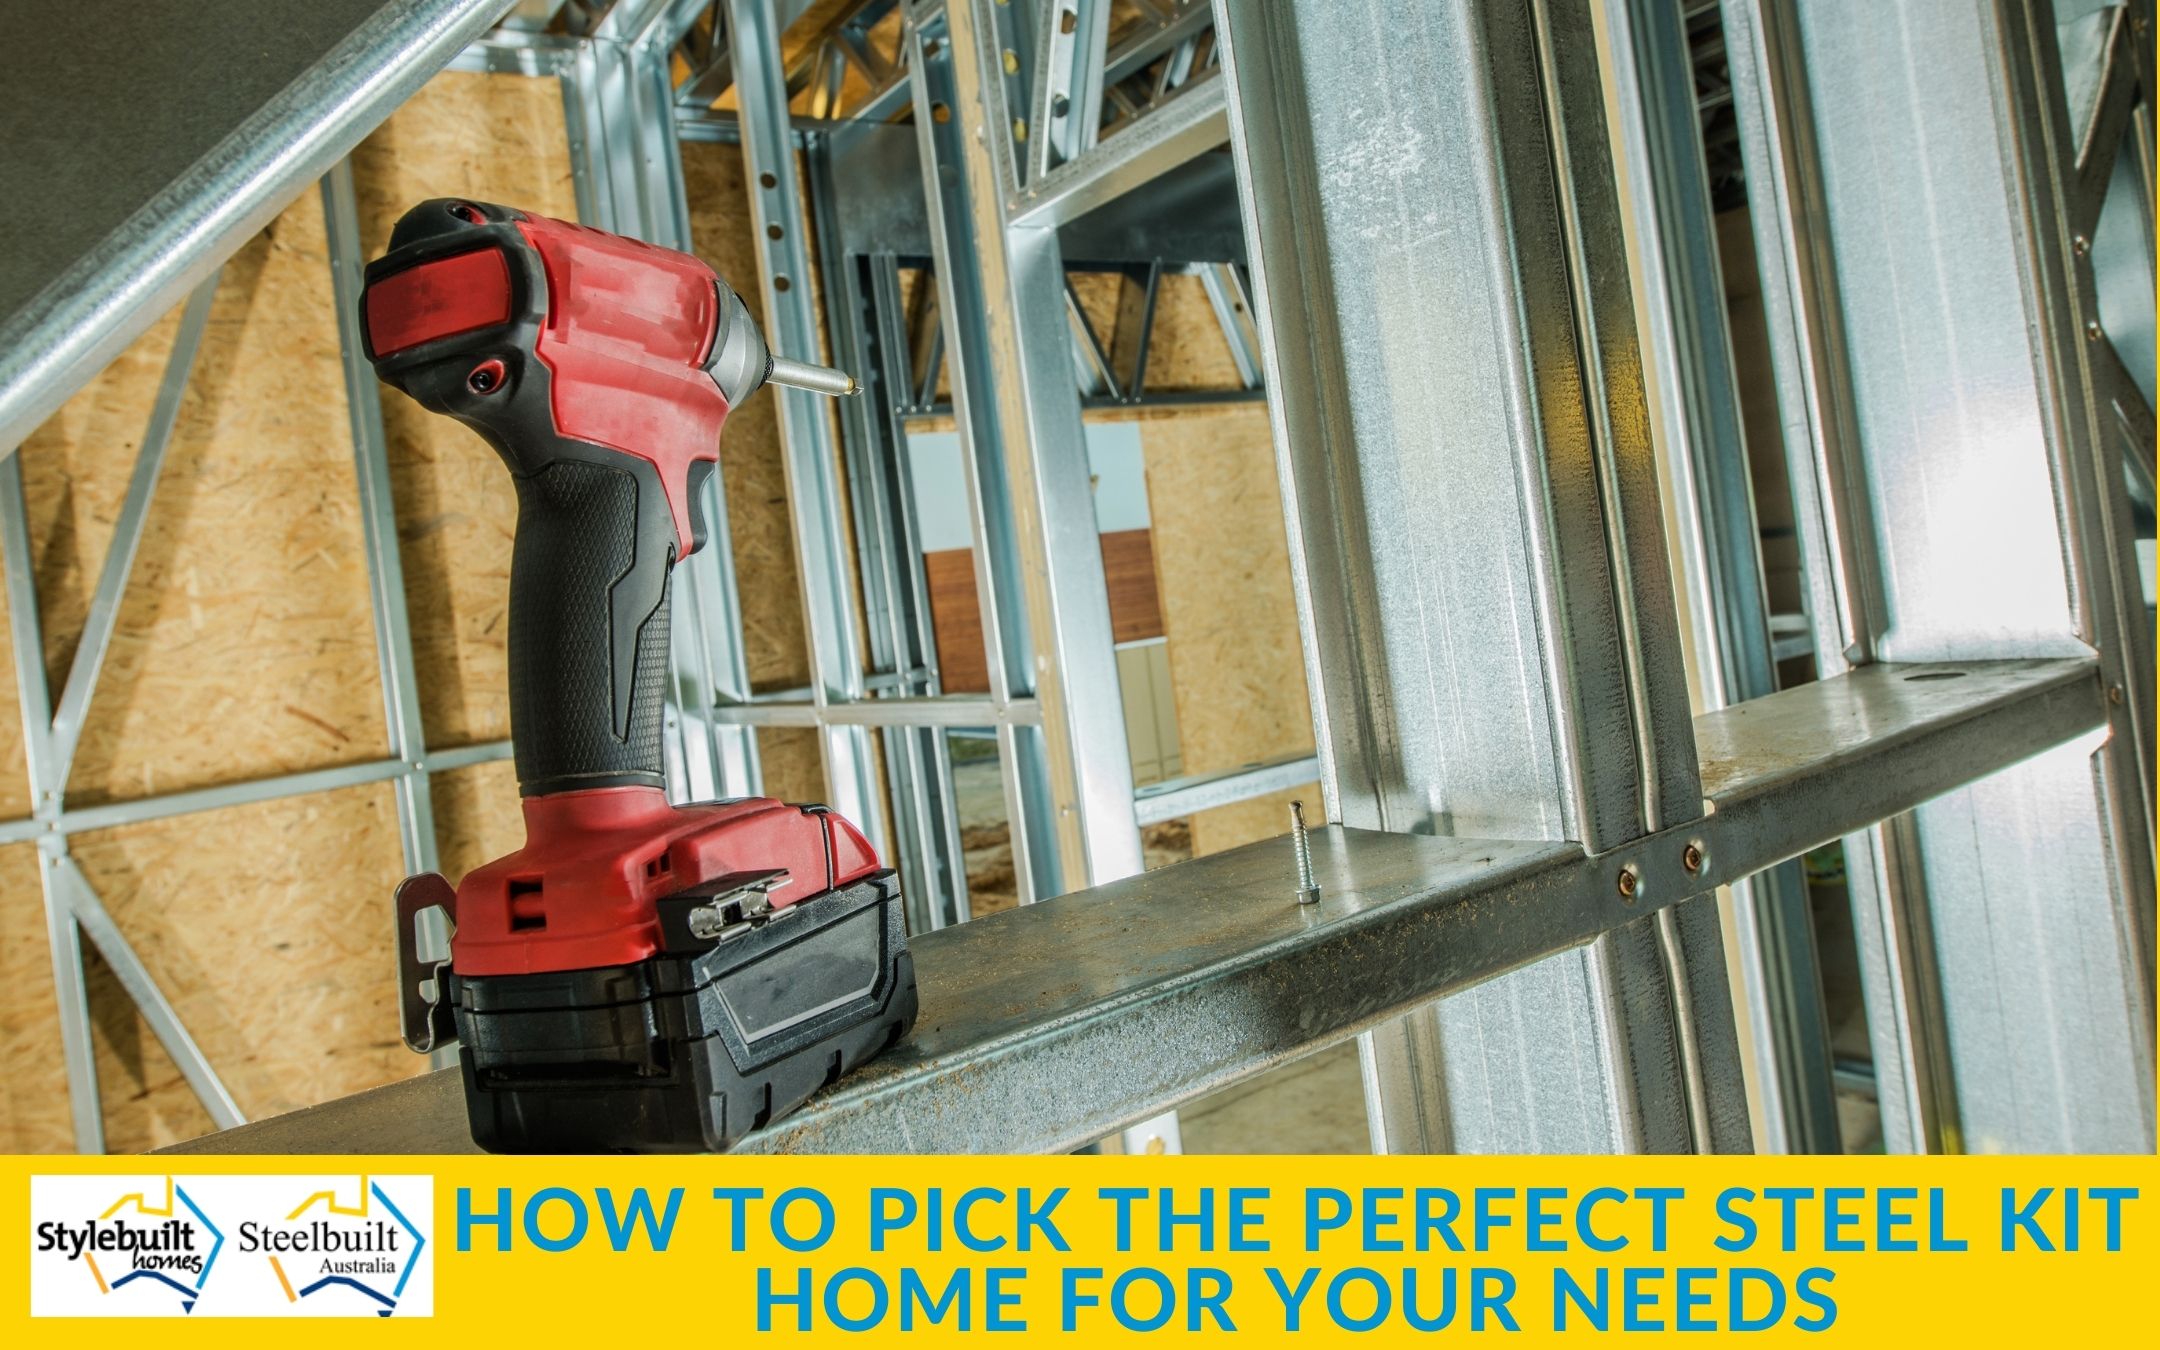 How to Pick the Perfect Steel Kit Home For Your Needs